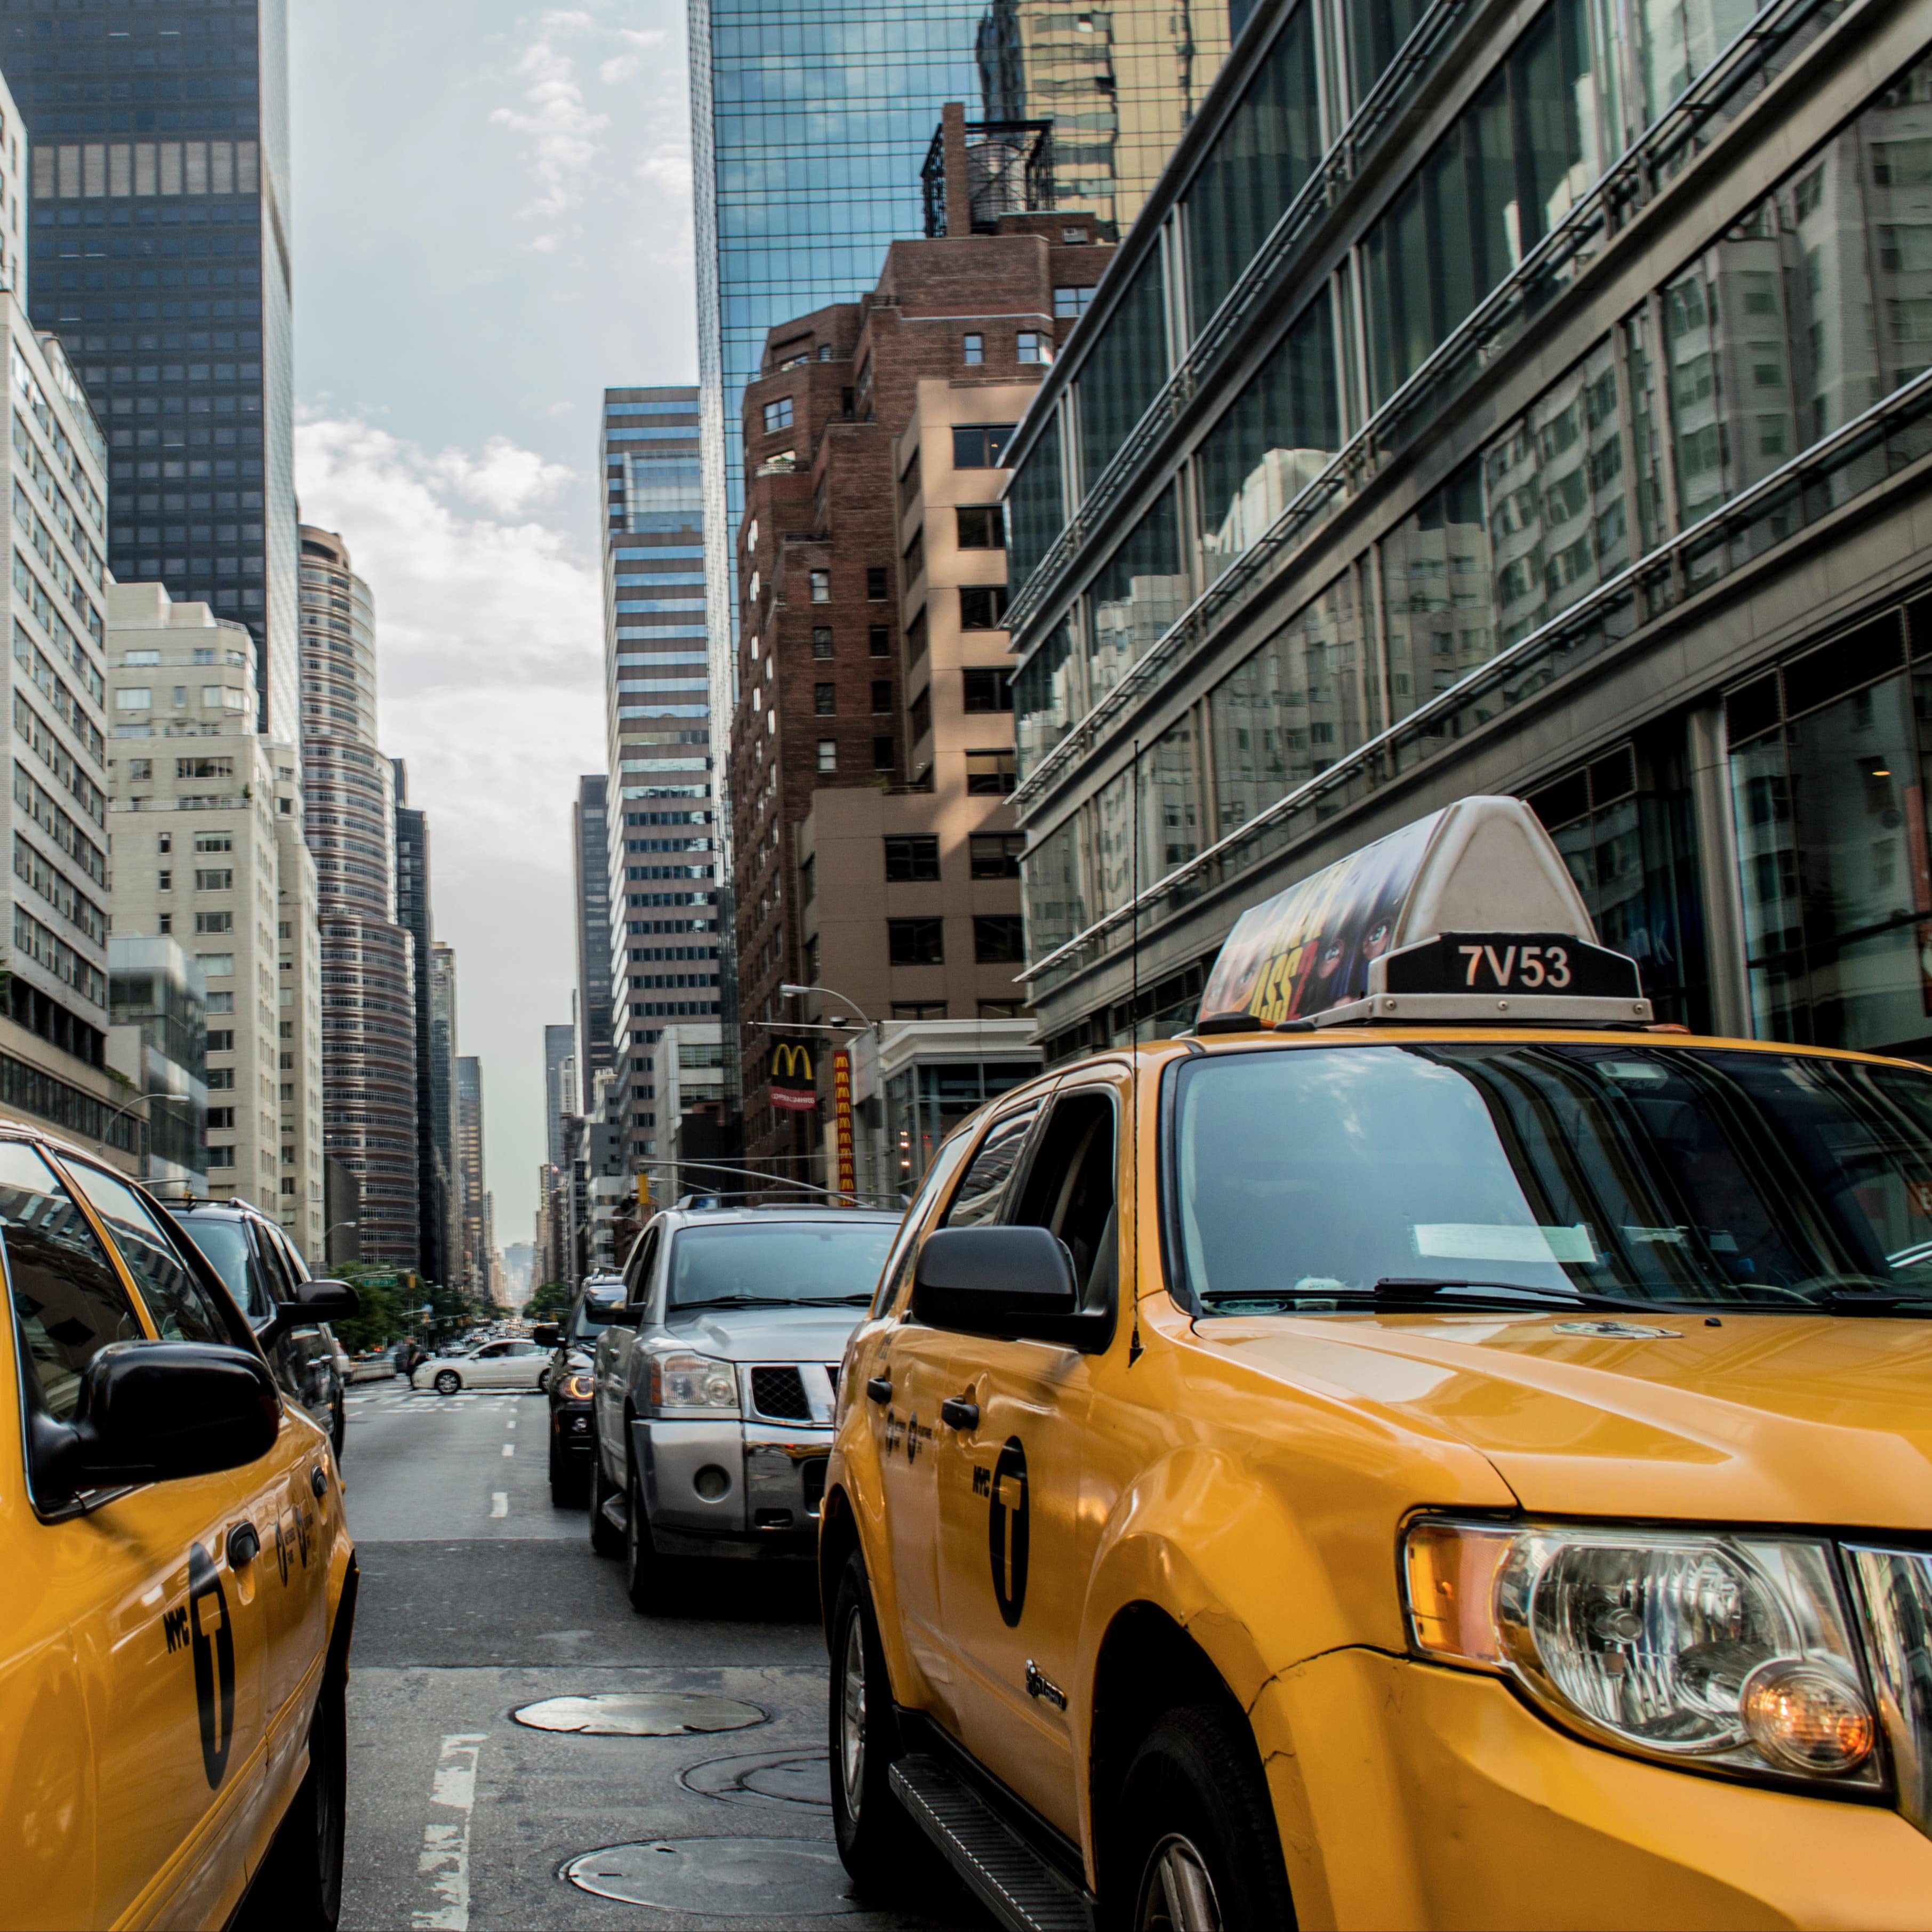 New York City street view with yellow taxi cab